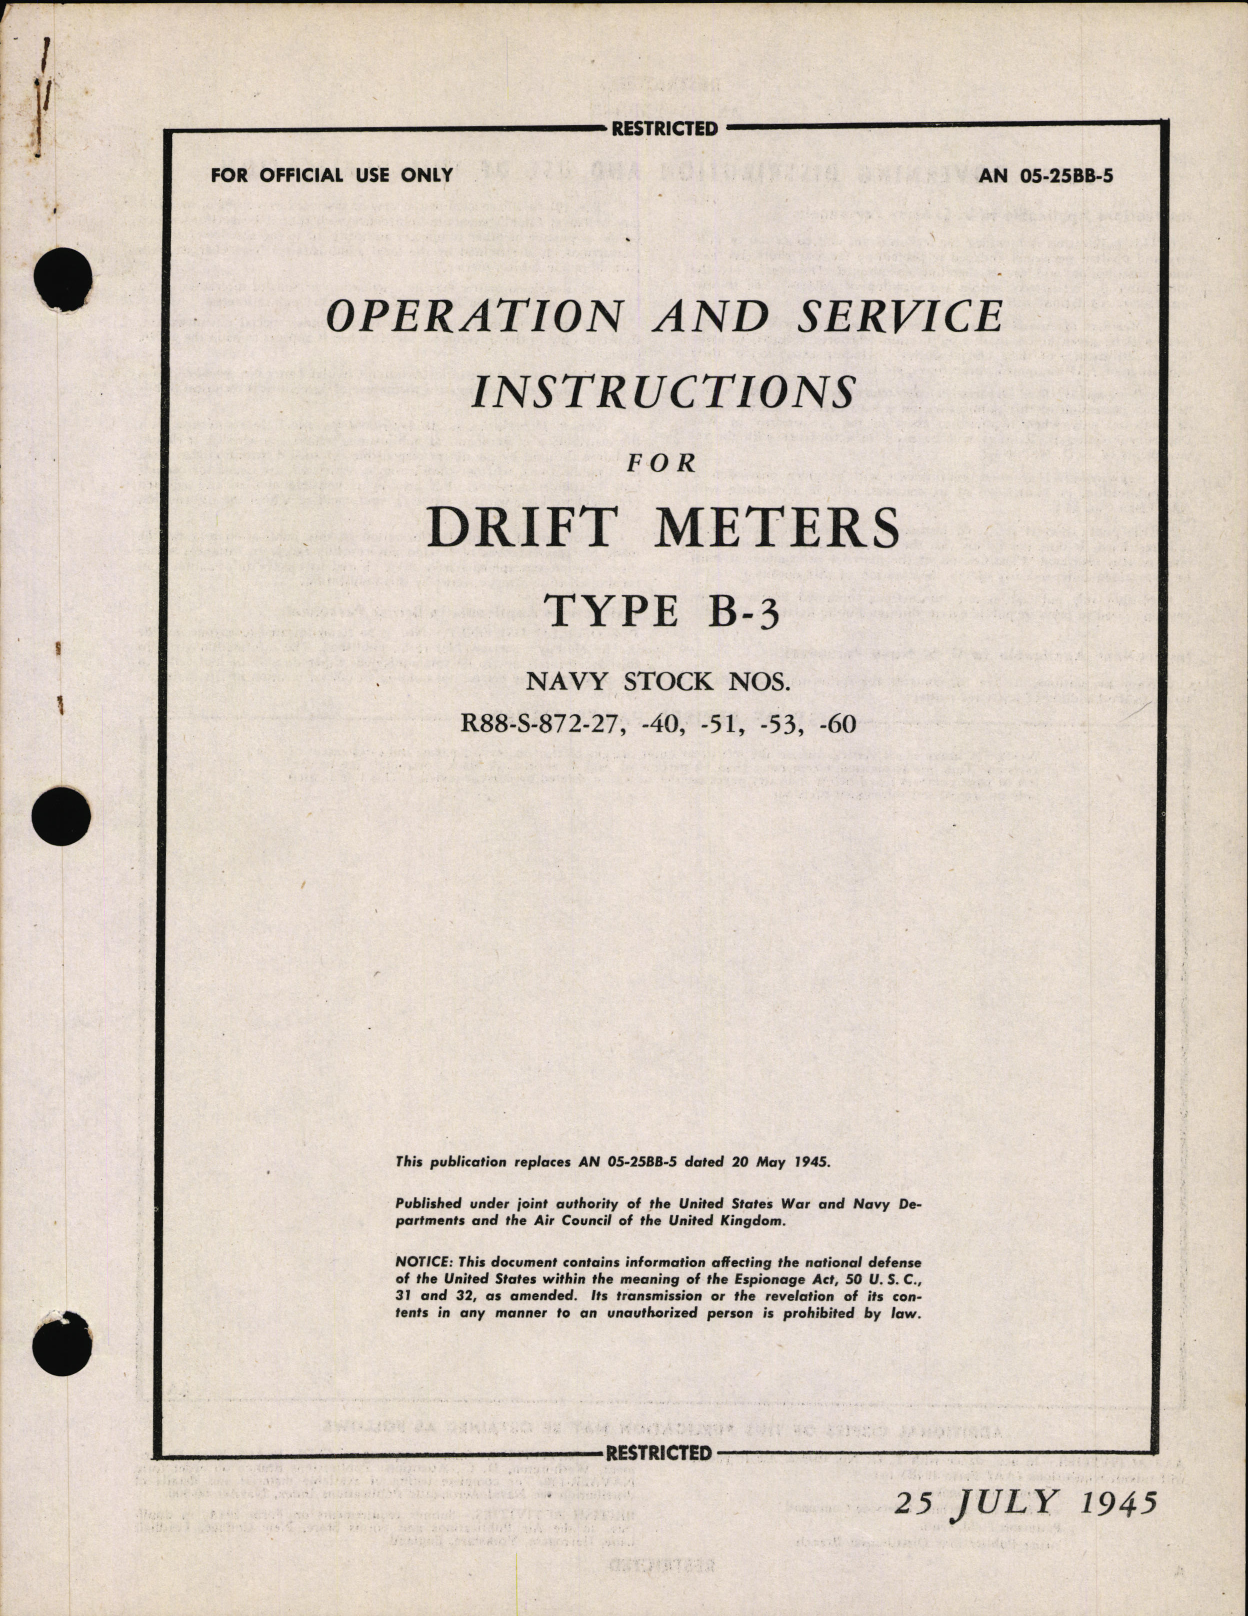 Sample page 1 from AirCorps Library document: Operation and Service Instructions for Drift Meters Type B-3 (Navy R88-S-872-27, -40, -51, -53, -60)